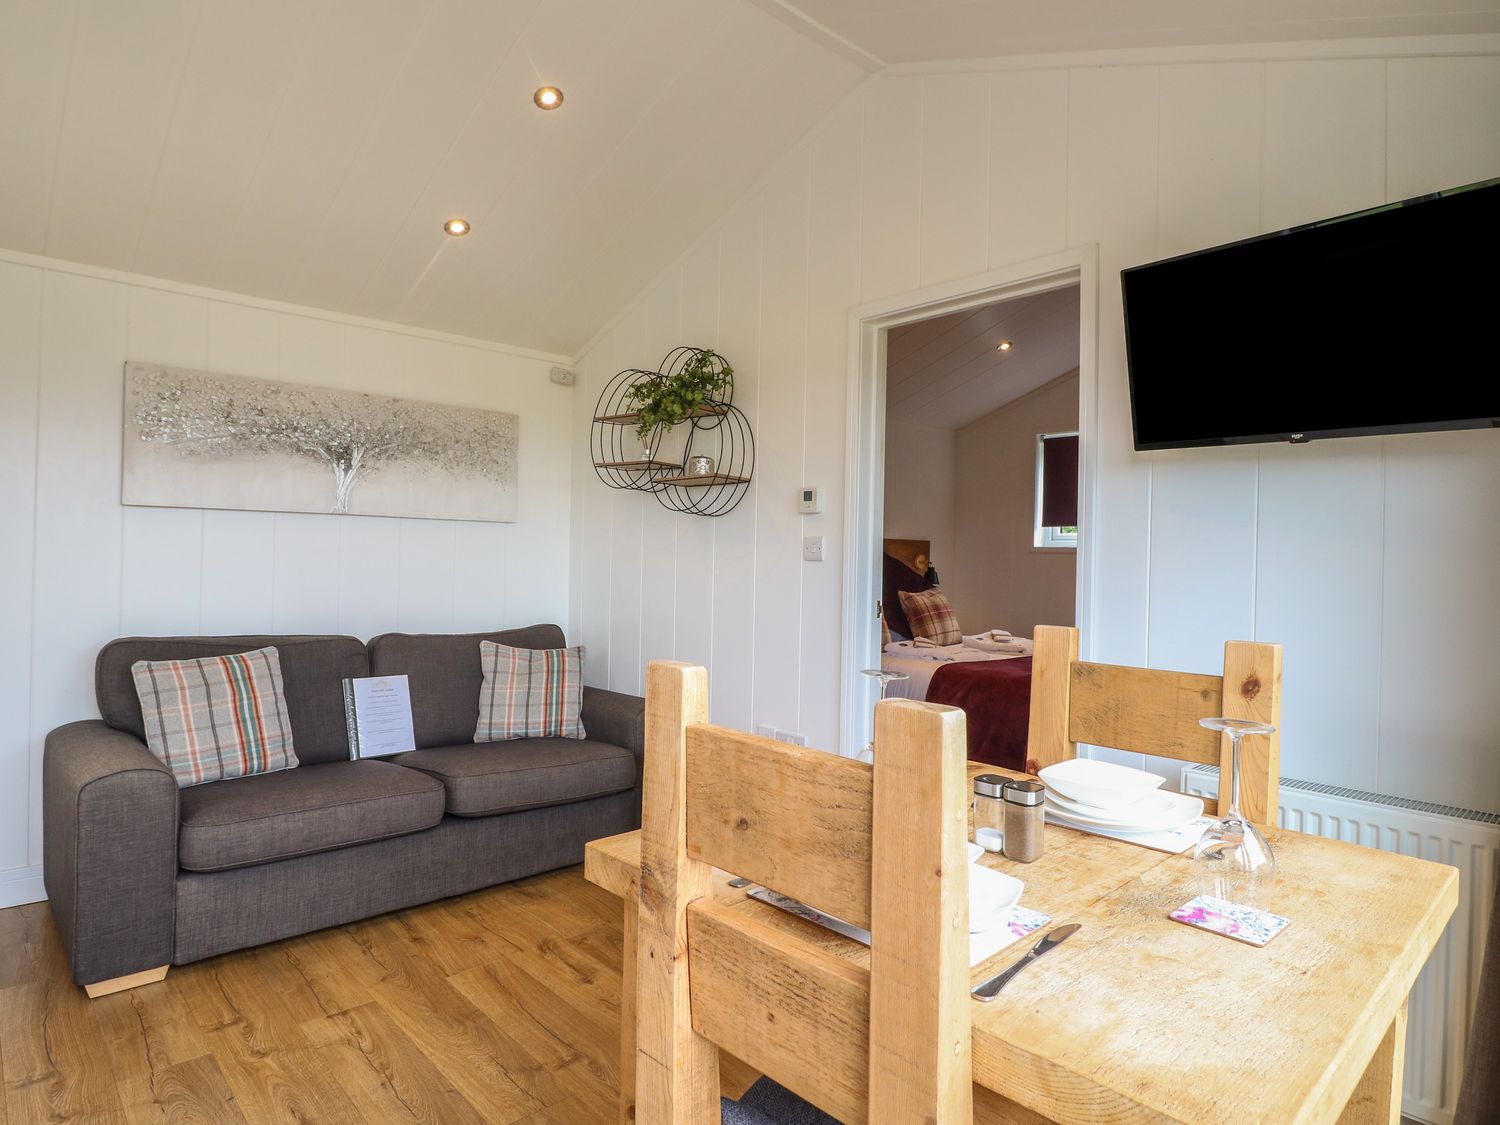 Oak, is near Donisthorpe, Leicestershire. One-bedroom lodge with lakeside views. Hot tub. Romantic. 